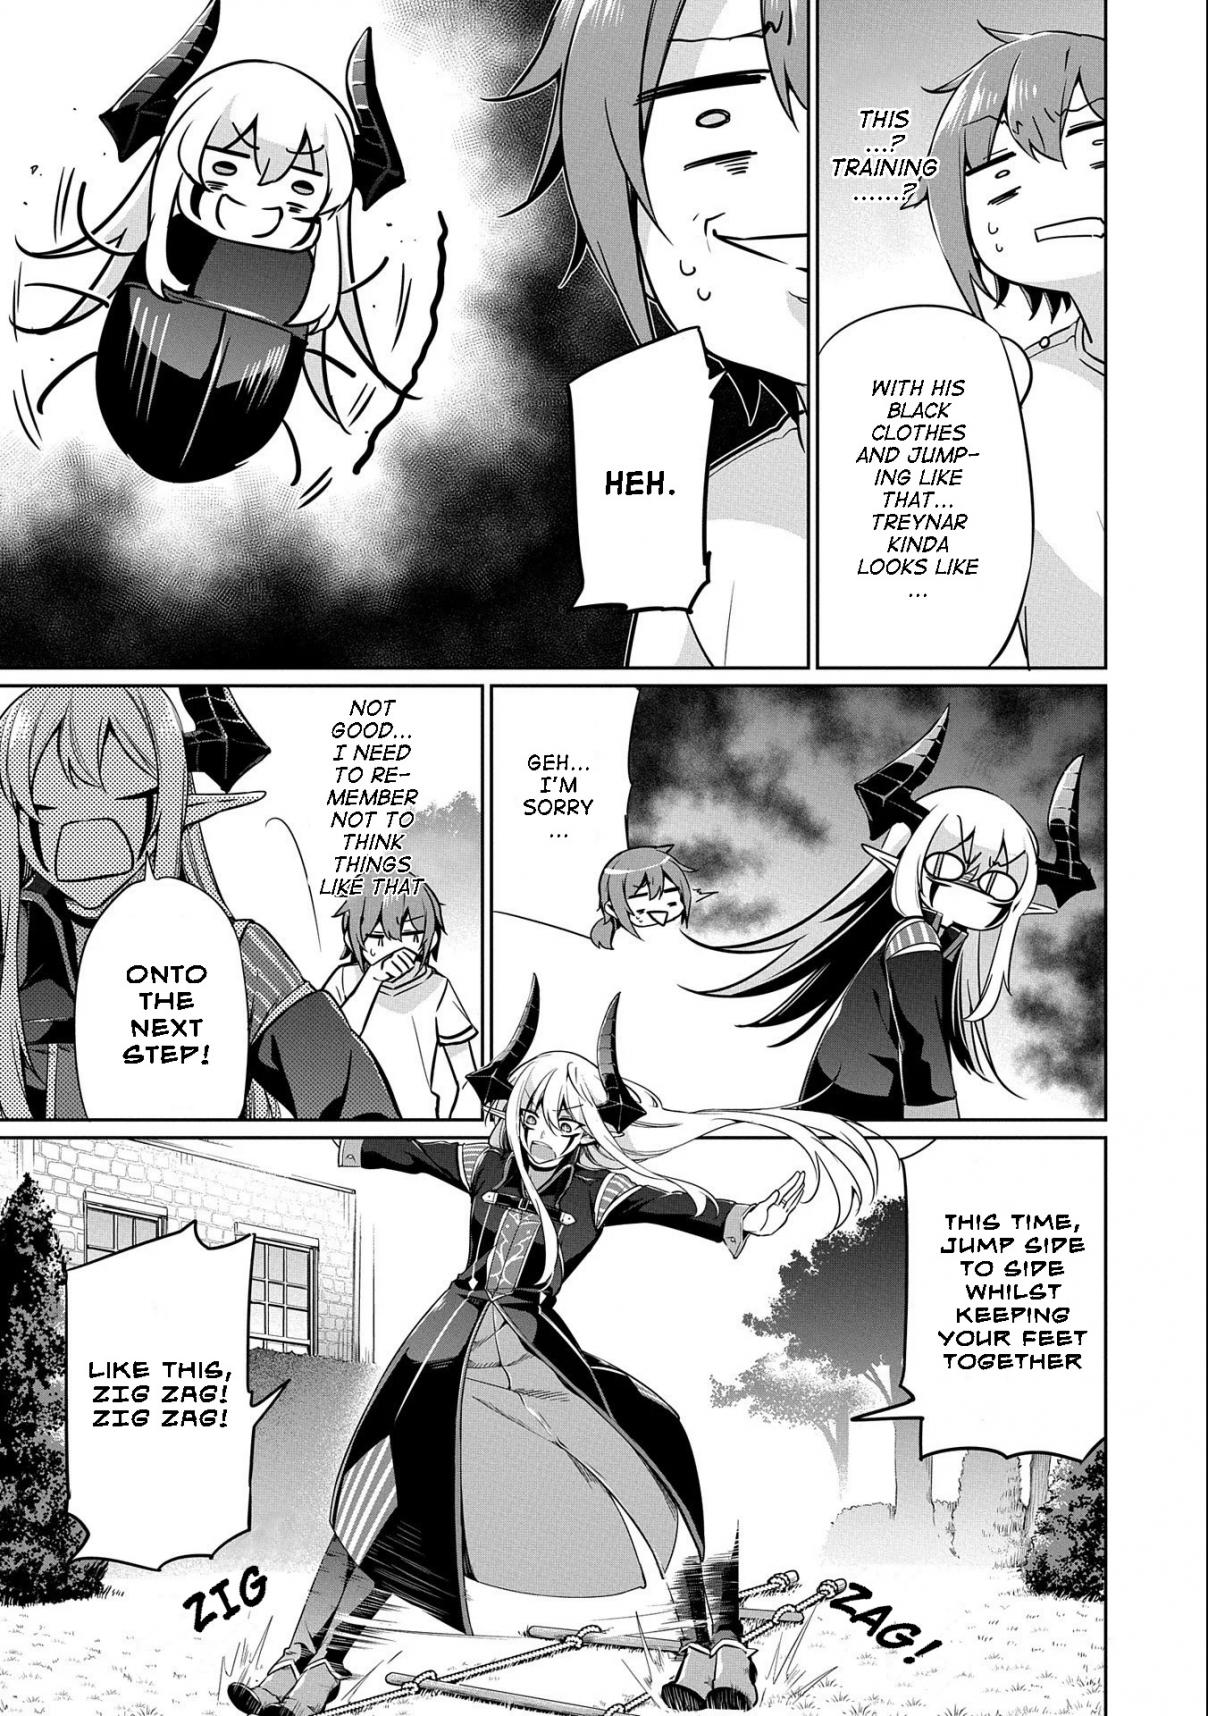 A Breakthrough Brought by Forbidden Master and Disciple Vol. 1 Ch. 3